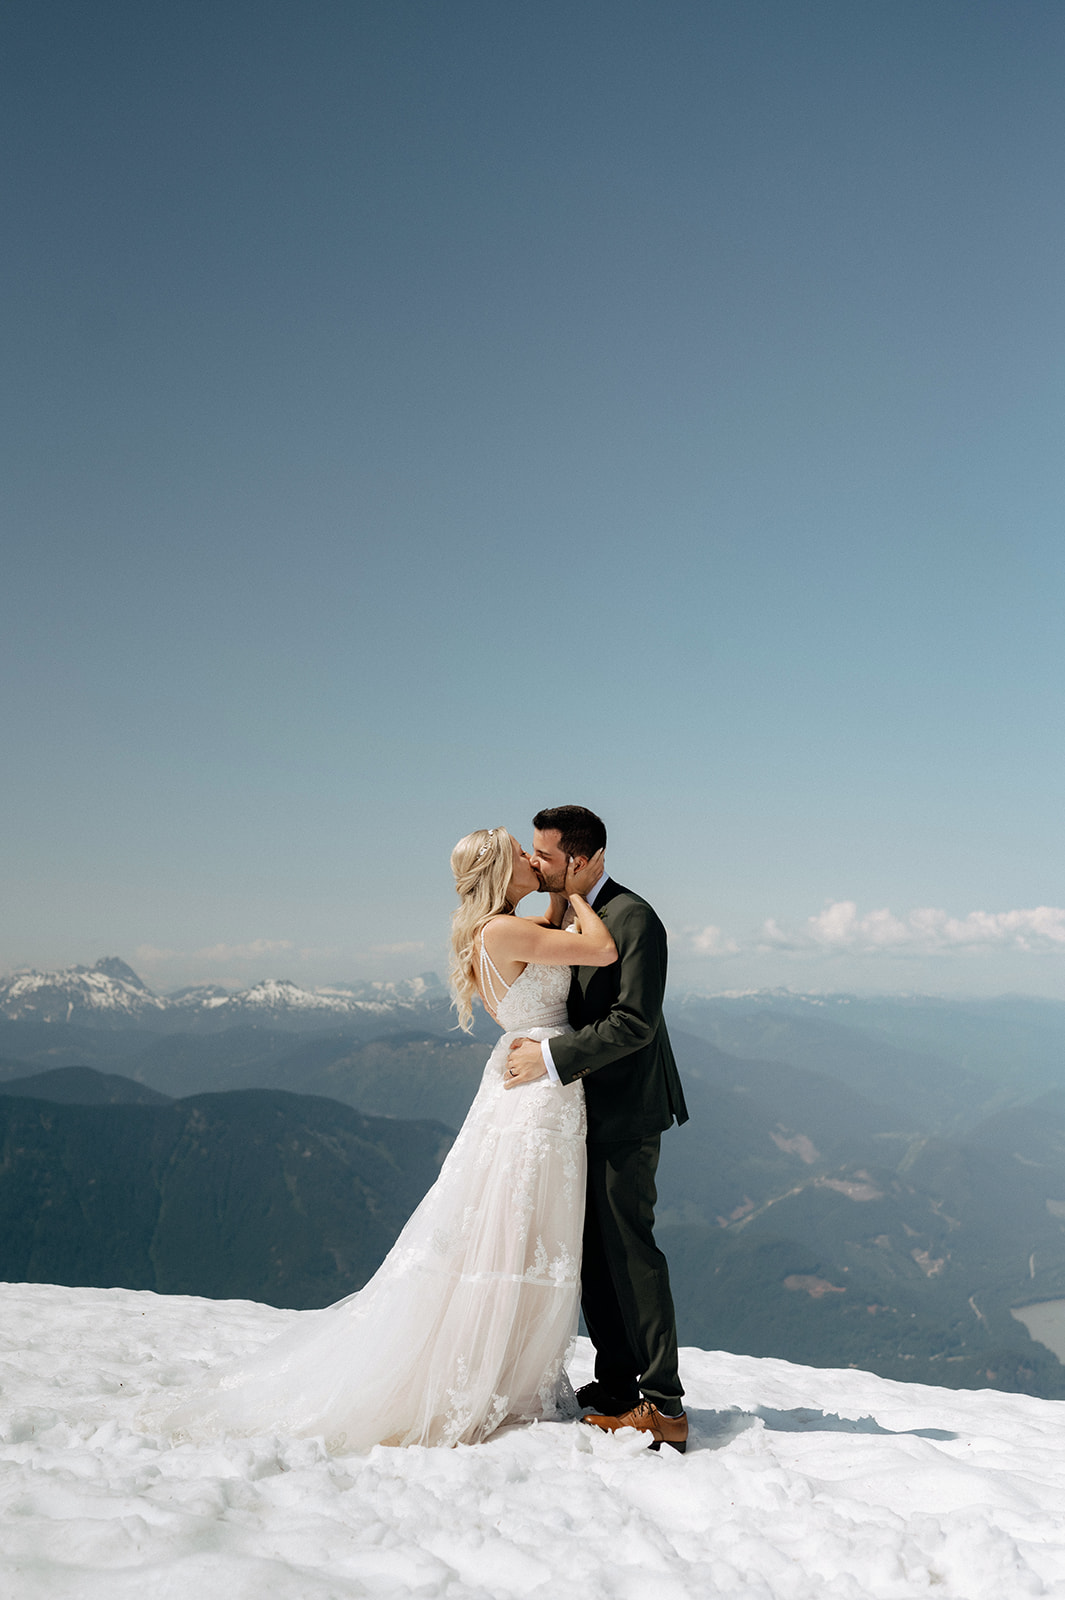 A couple who eloped in Hope BC via helicopter 